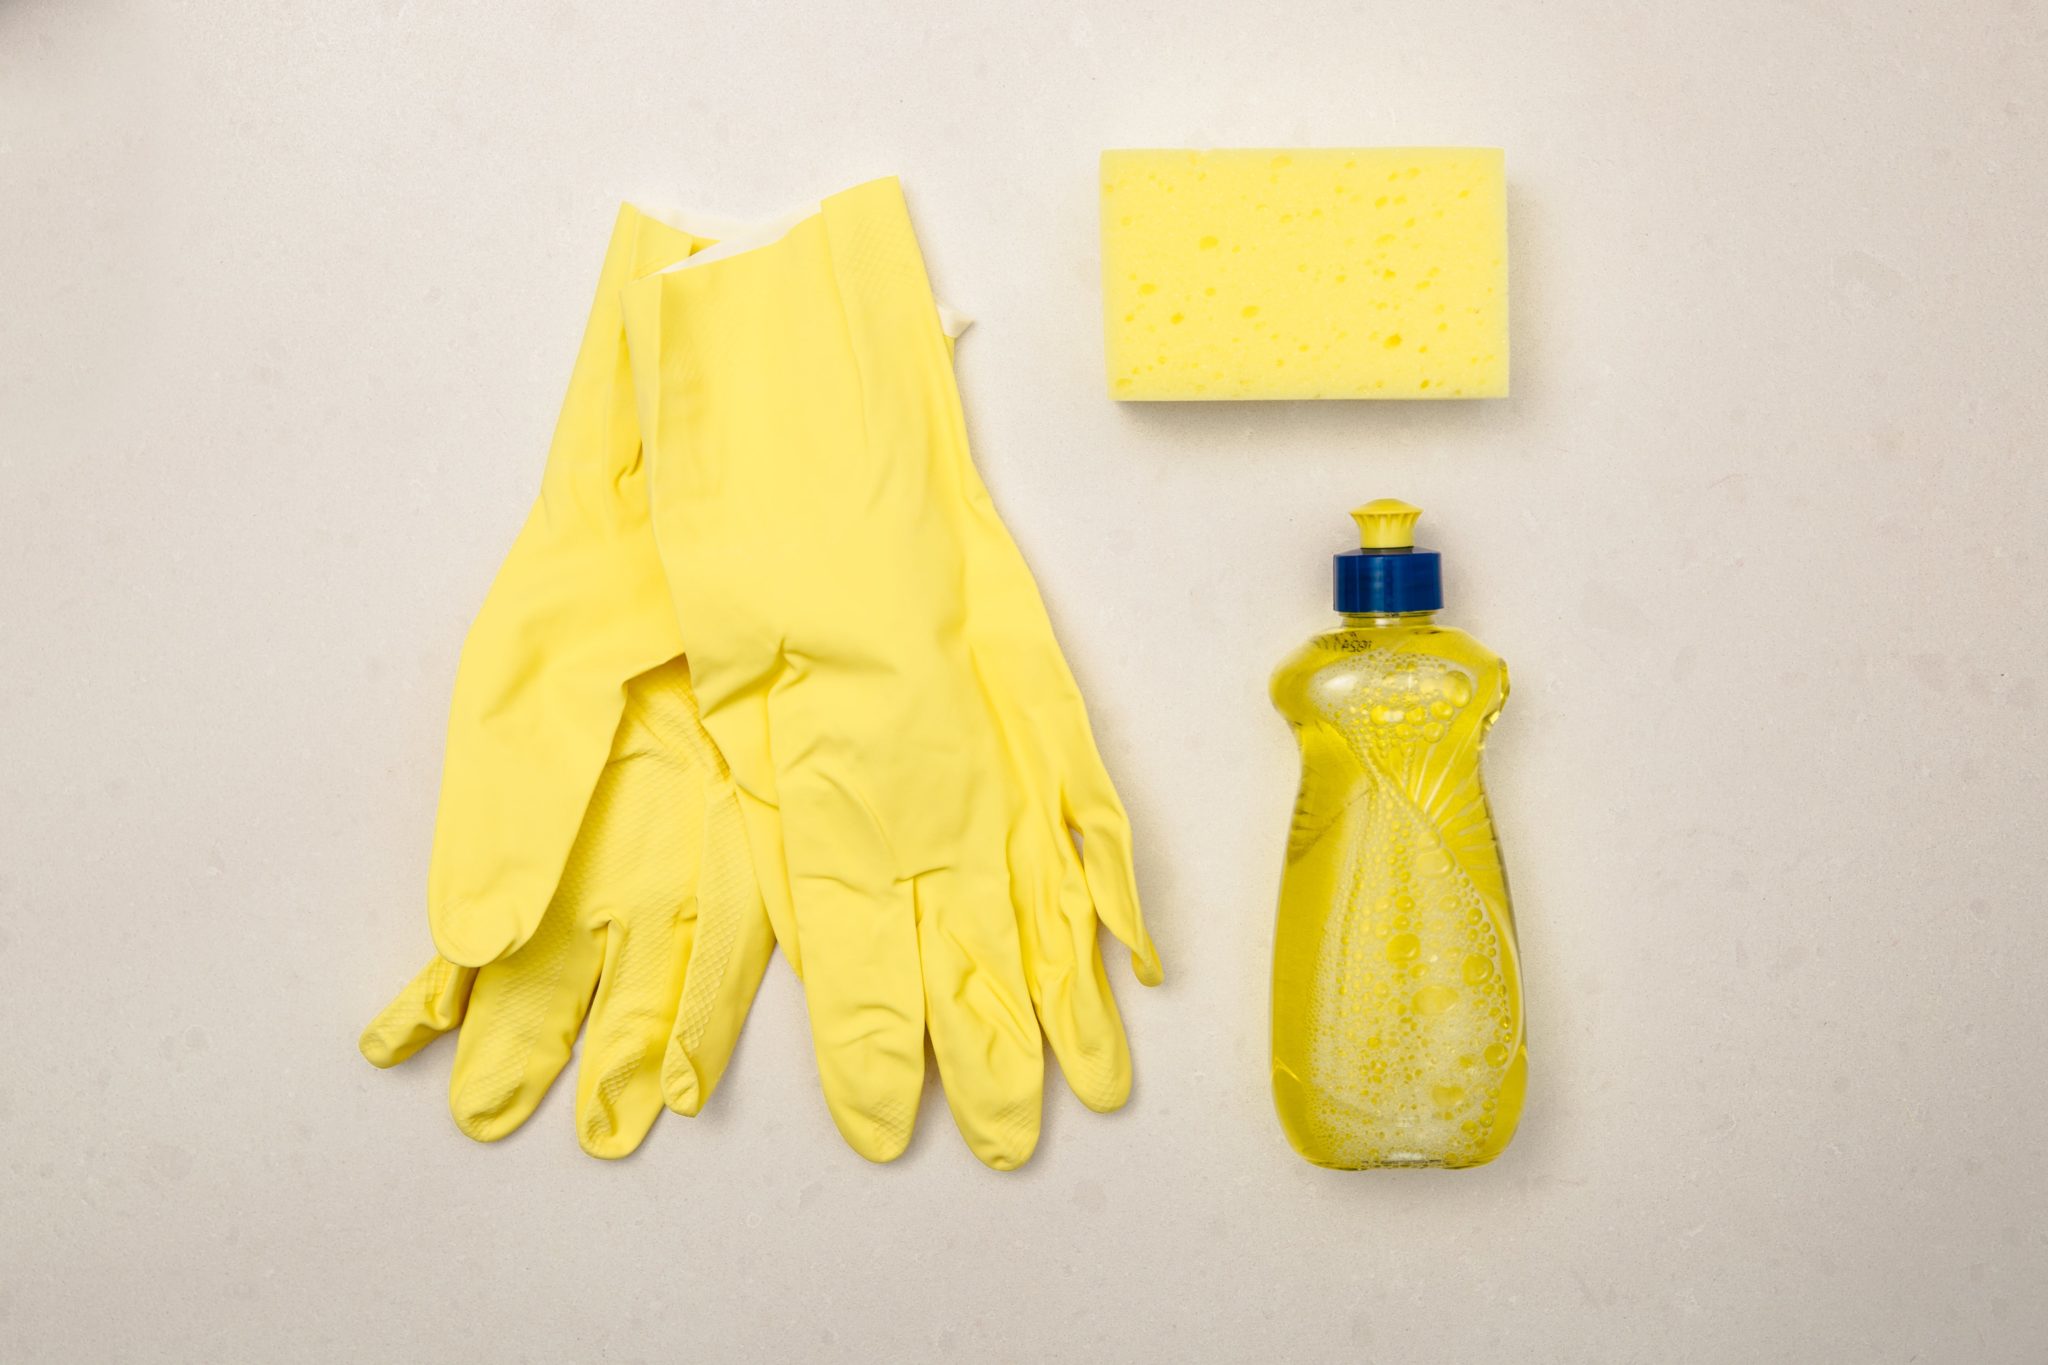 We Rank Yellow Cleaning Supply Flatlay 4460x4460